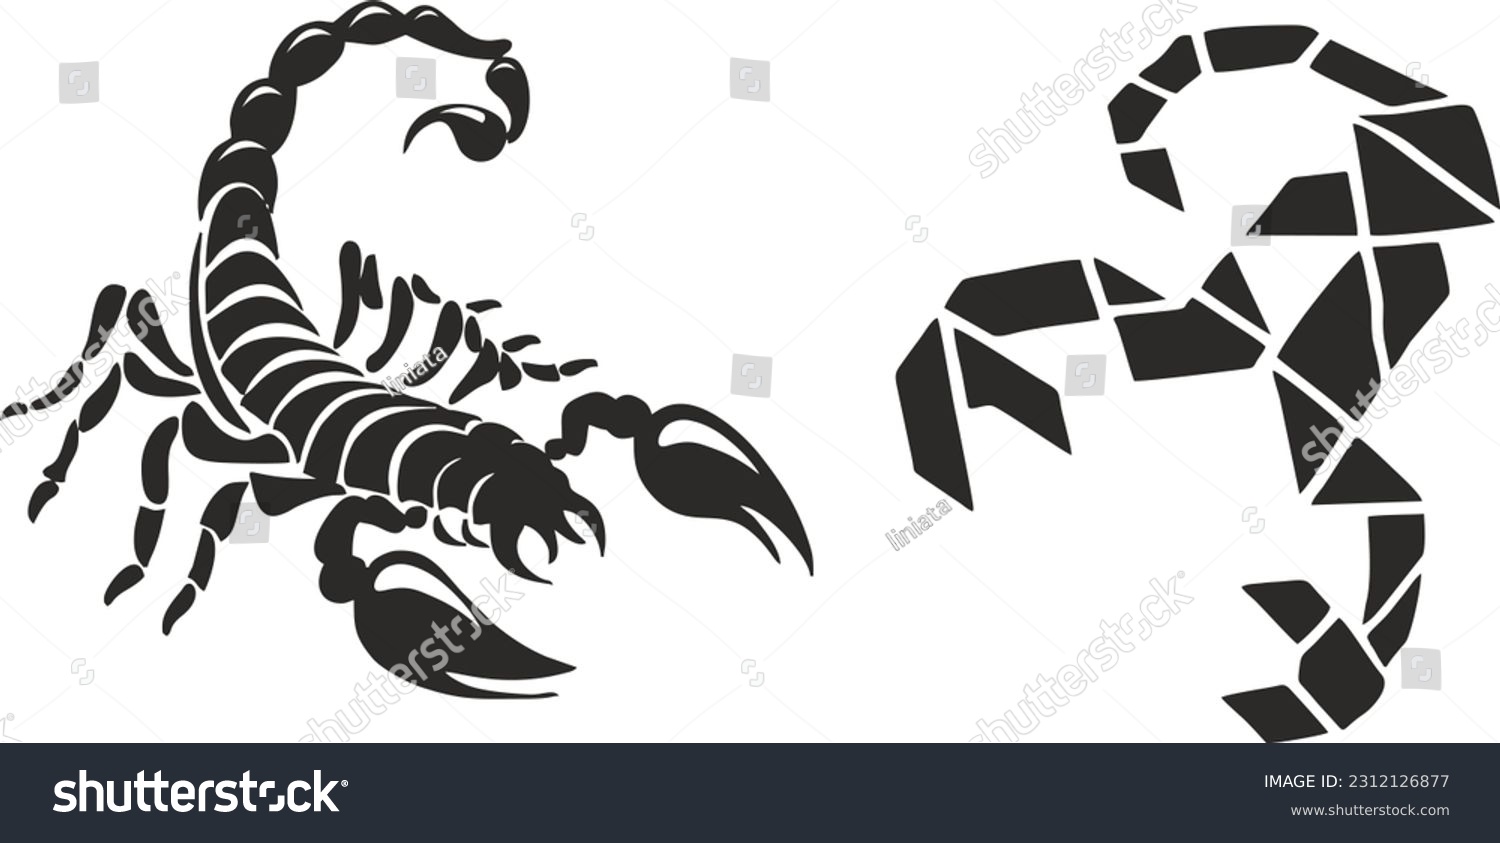 Scorpion vector, realistic and abstract modern scorpion drawing printable for tattoos and shirt prints, adjustable black scorpion with long tails, geometric scorpion motif, scorpio horoscope #2312126877